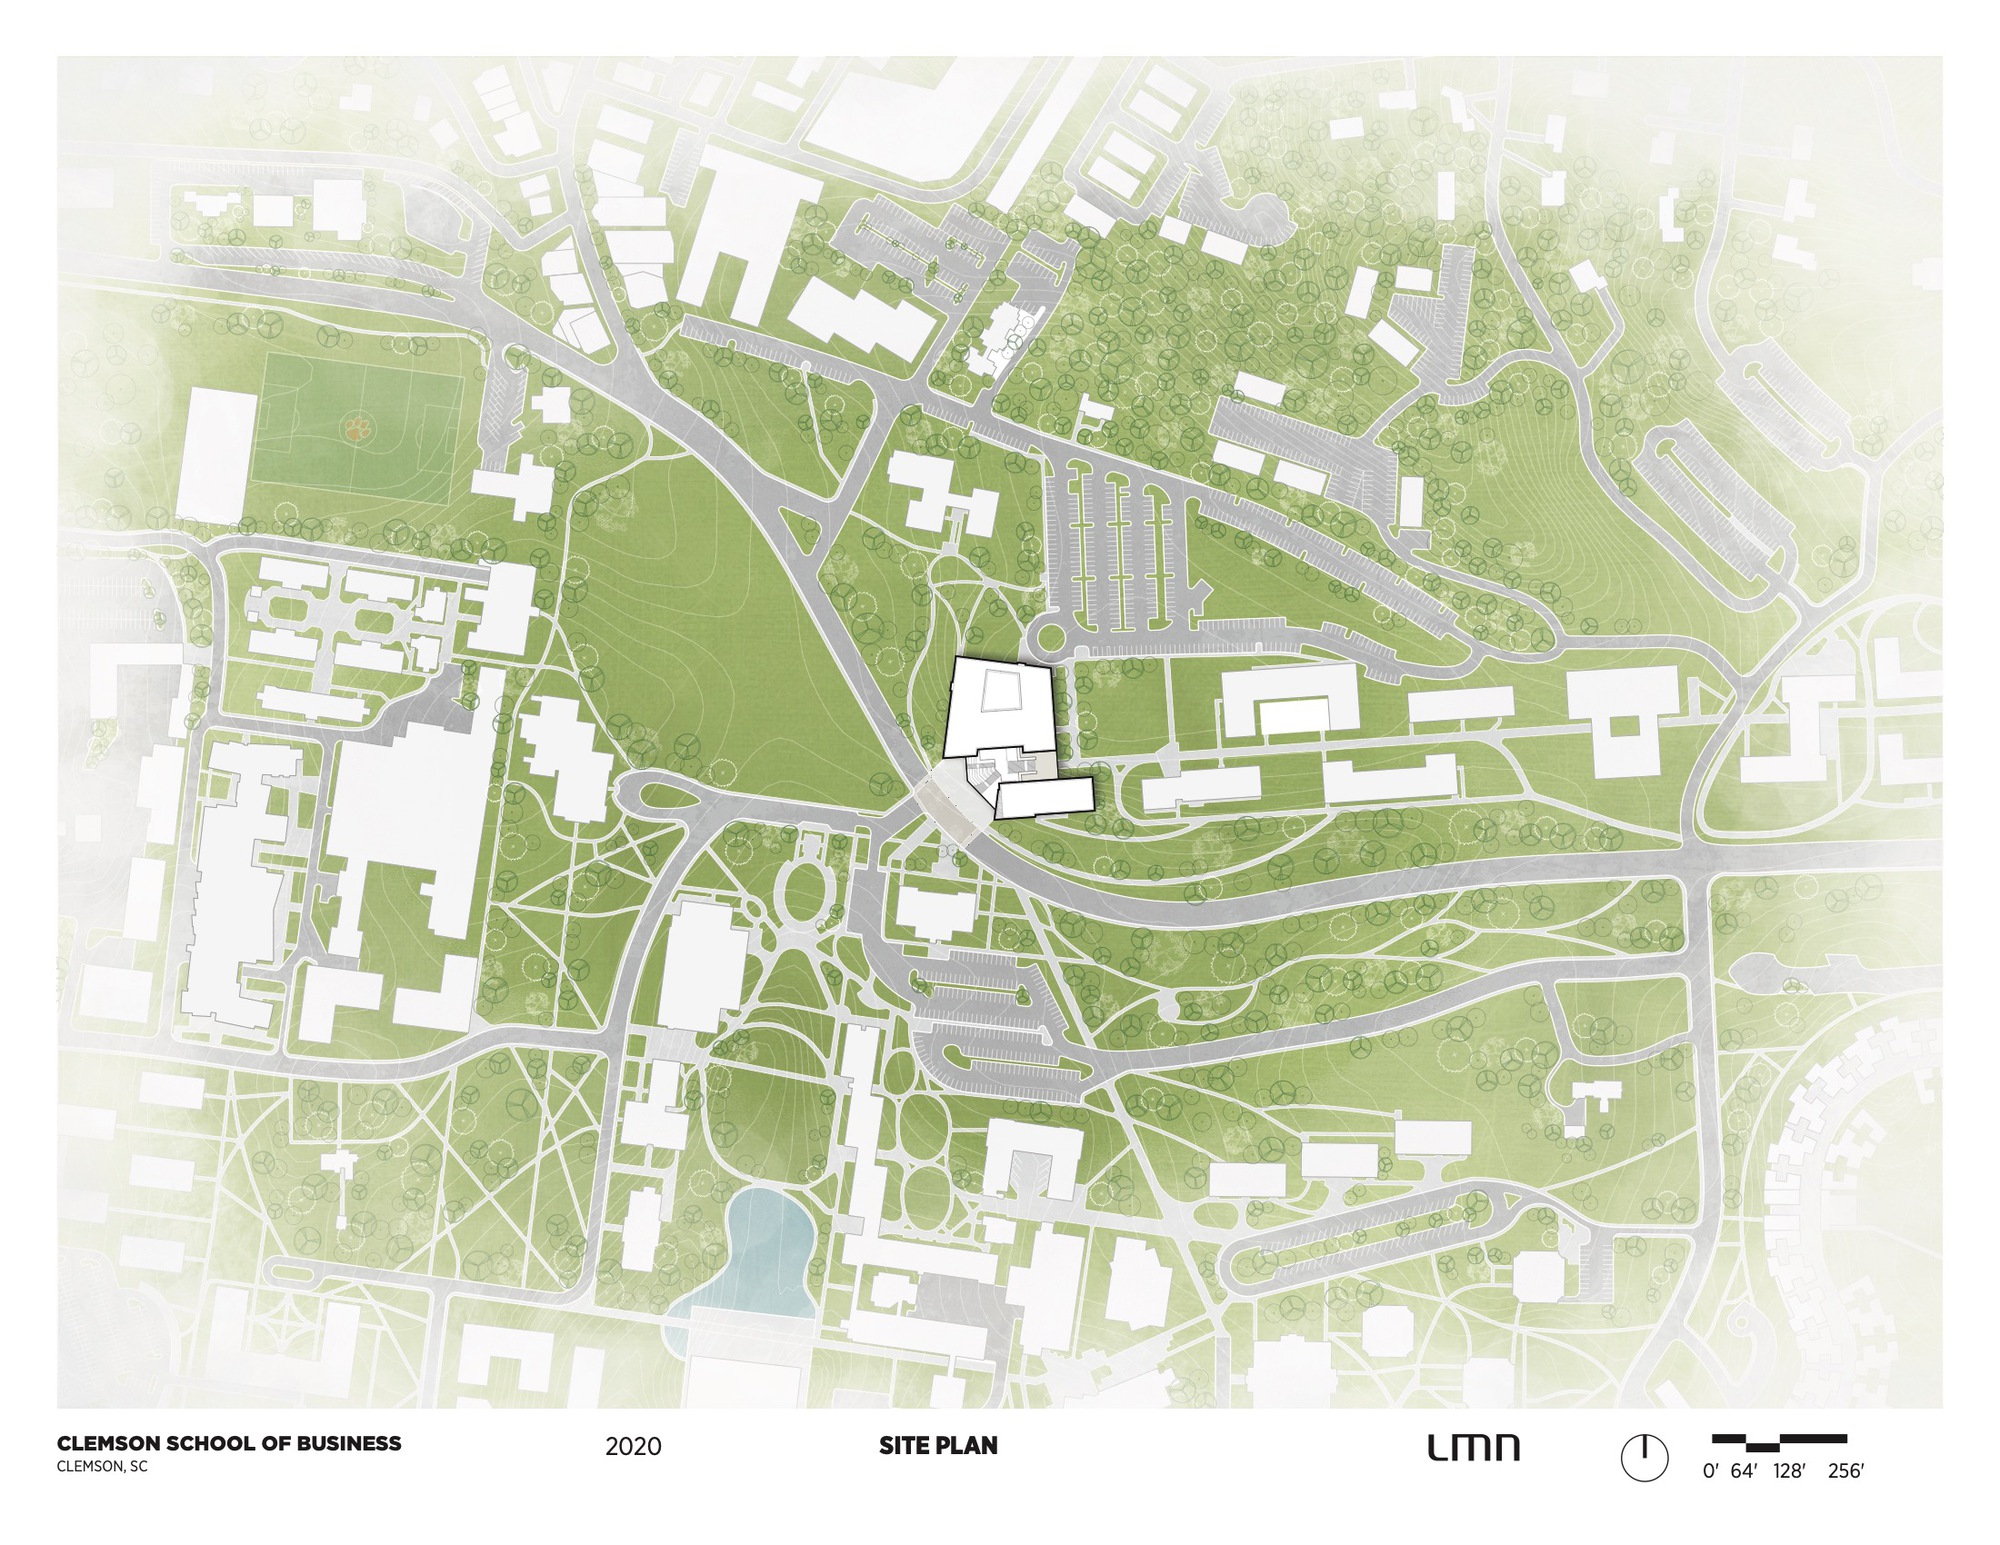 8_wilbur-o-and-ann-powers-college-of-business-site-plan-image-credit-lmn-architects.jpg